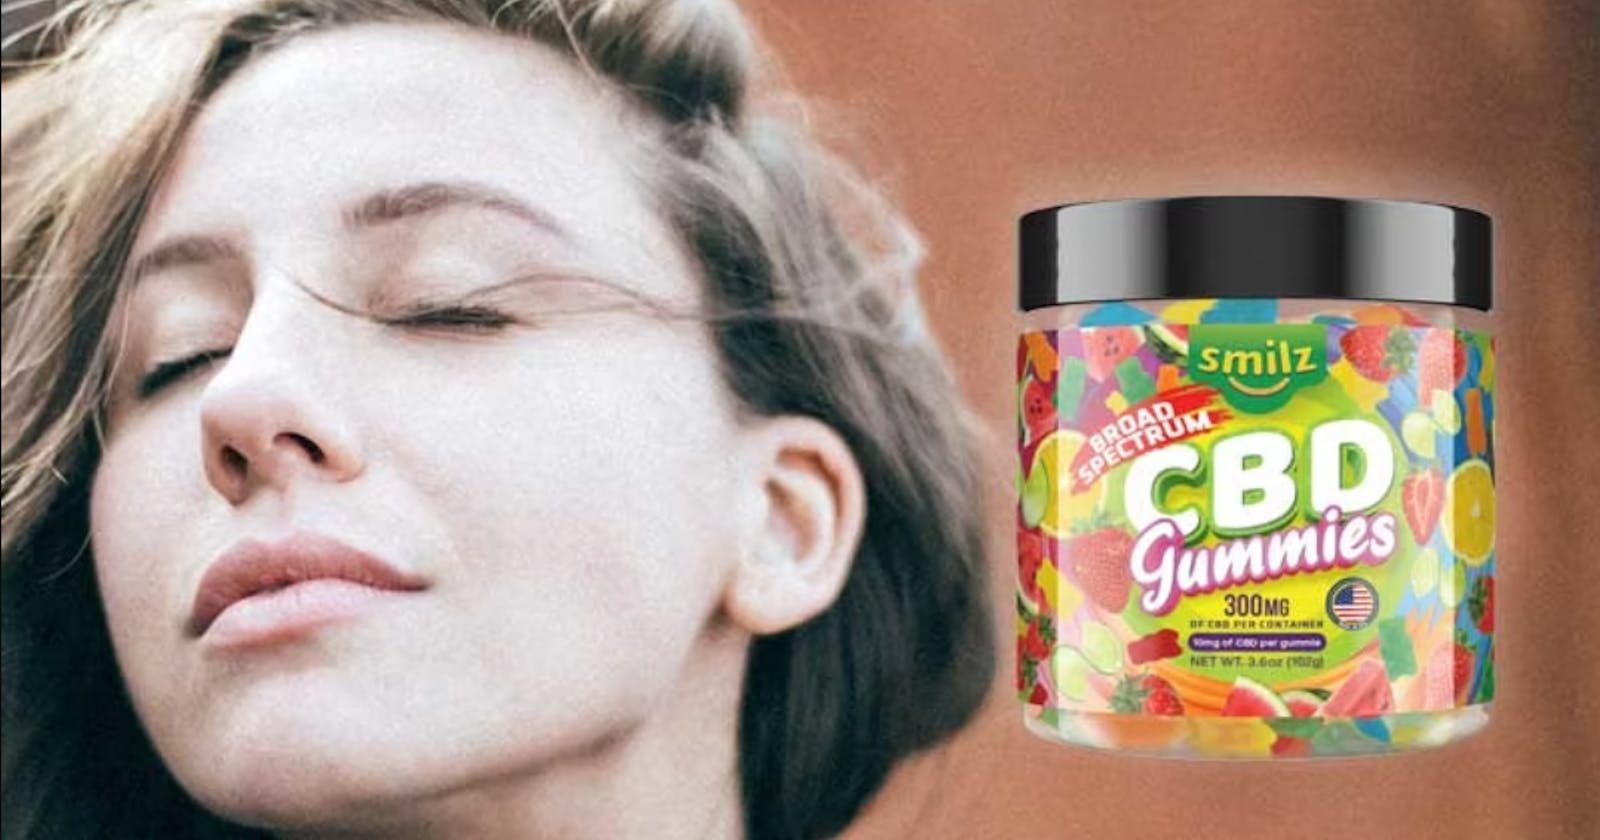 Manage Discomfort the Natural Way with Steven Gundry CBD Gummies